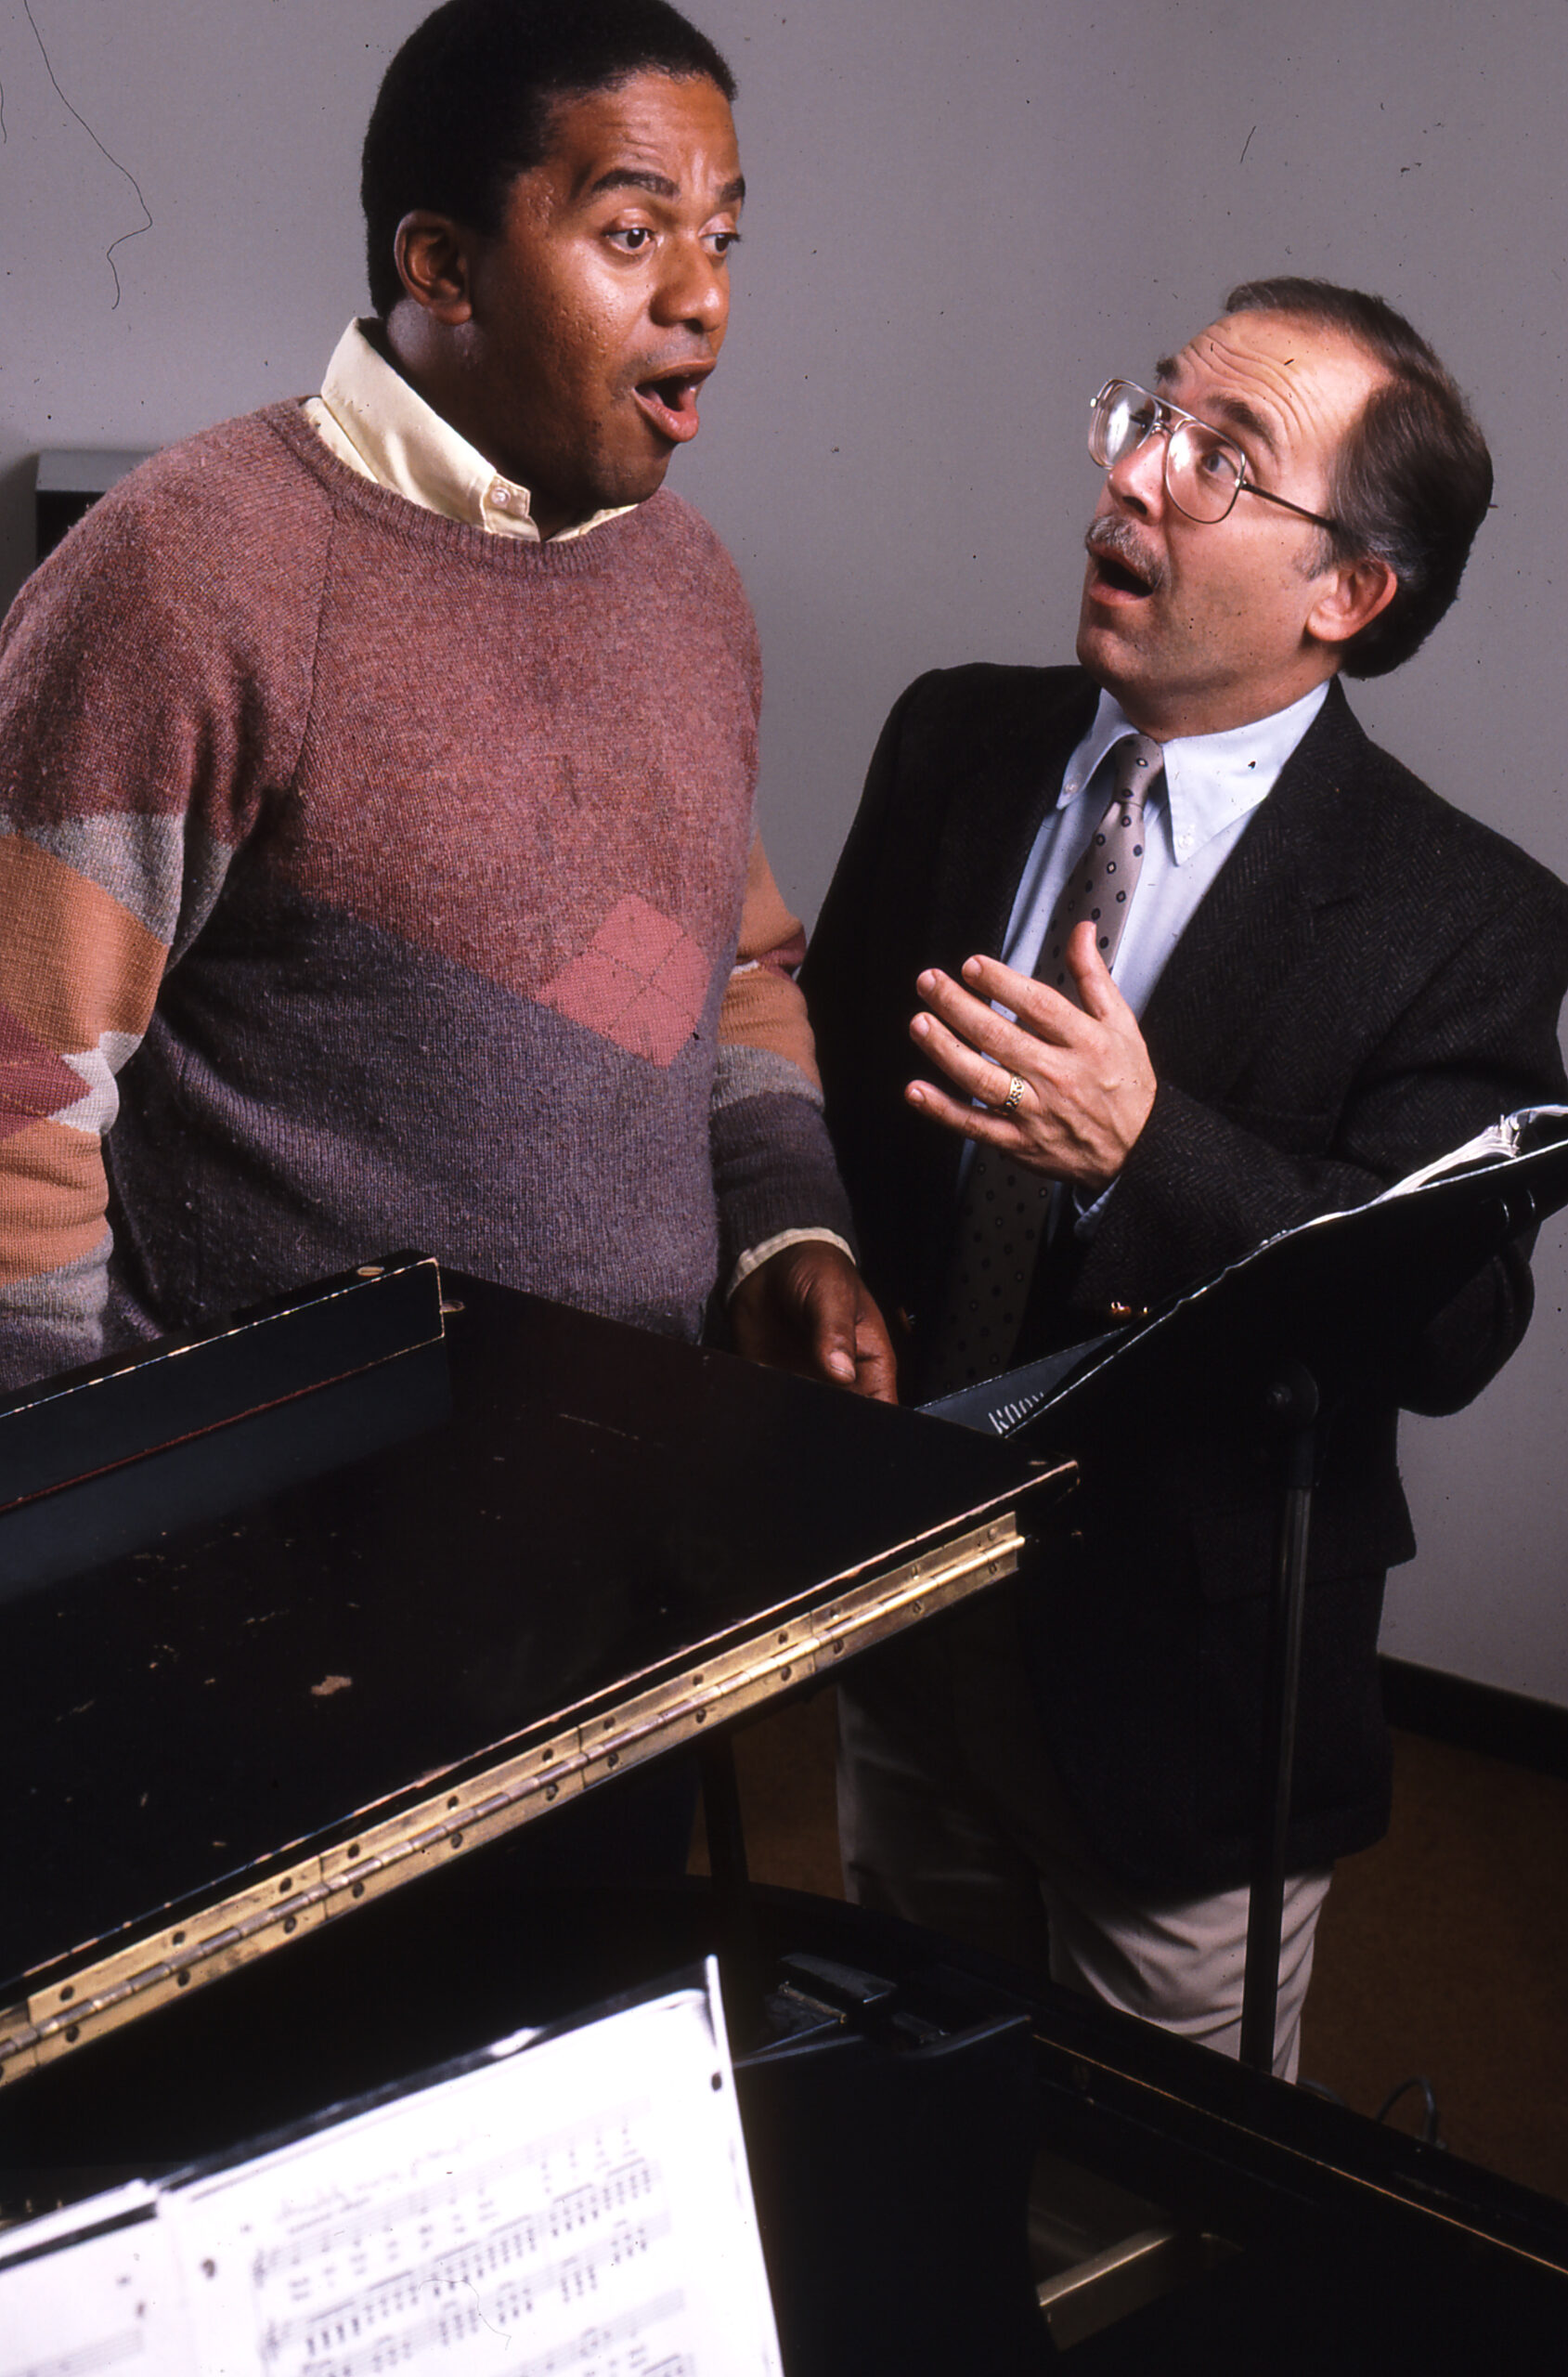 1986: Michael Sells conducts a singing lesson with a student.